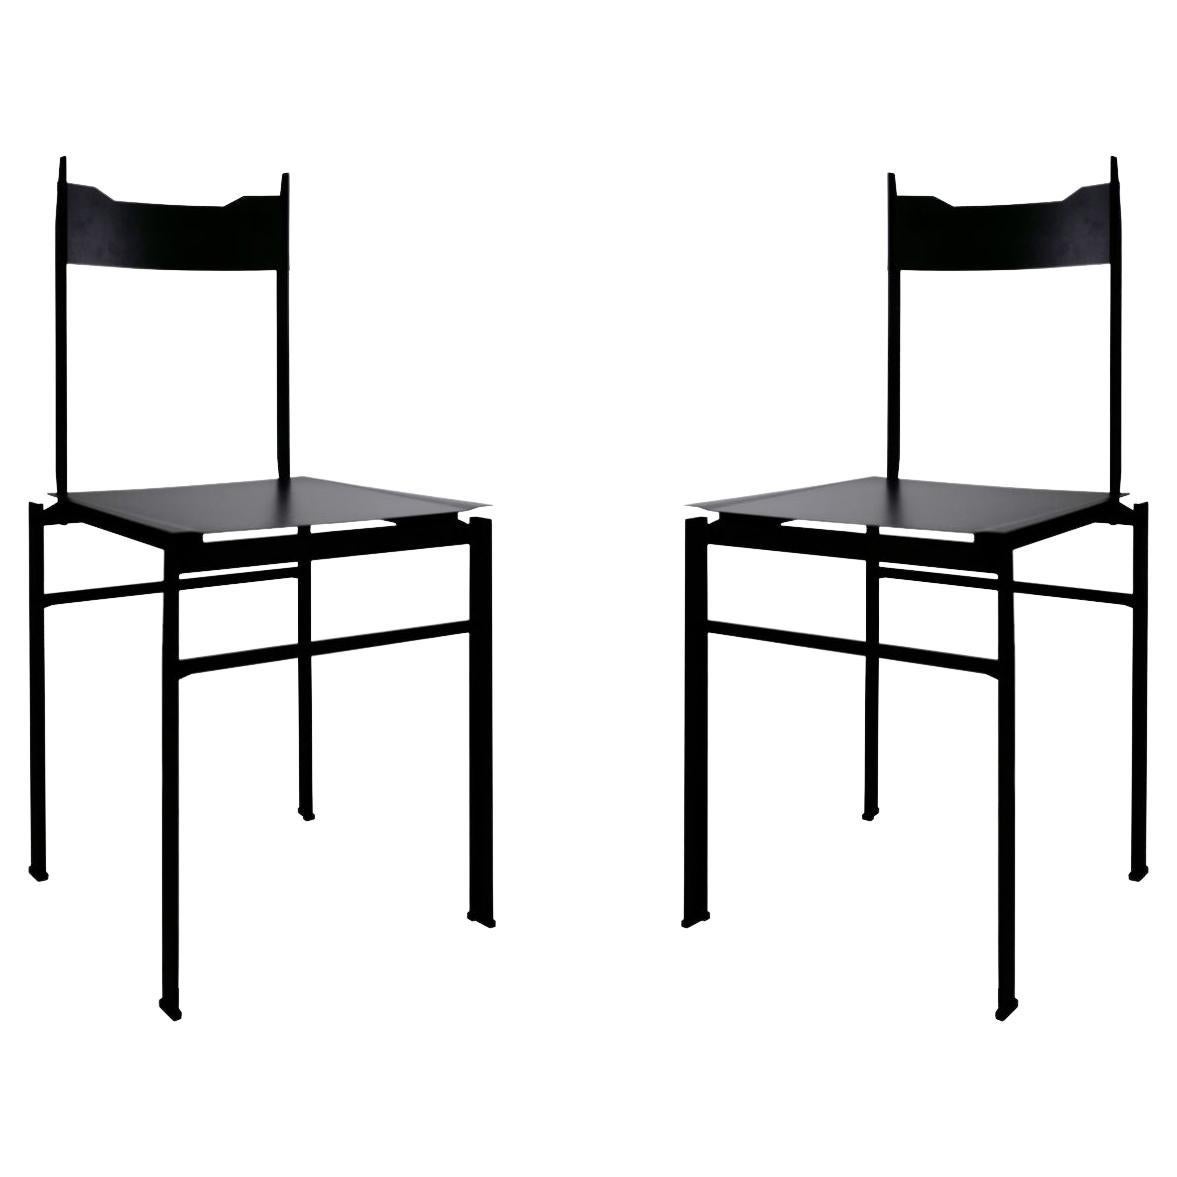 Set of 2 Italian Contemporary Steel and Aluminium Chairs, "Ensis" by Errante